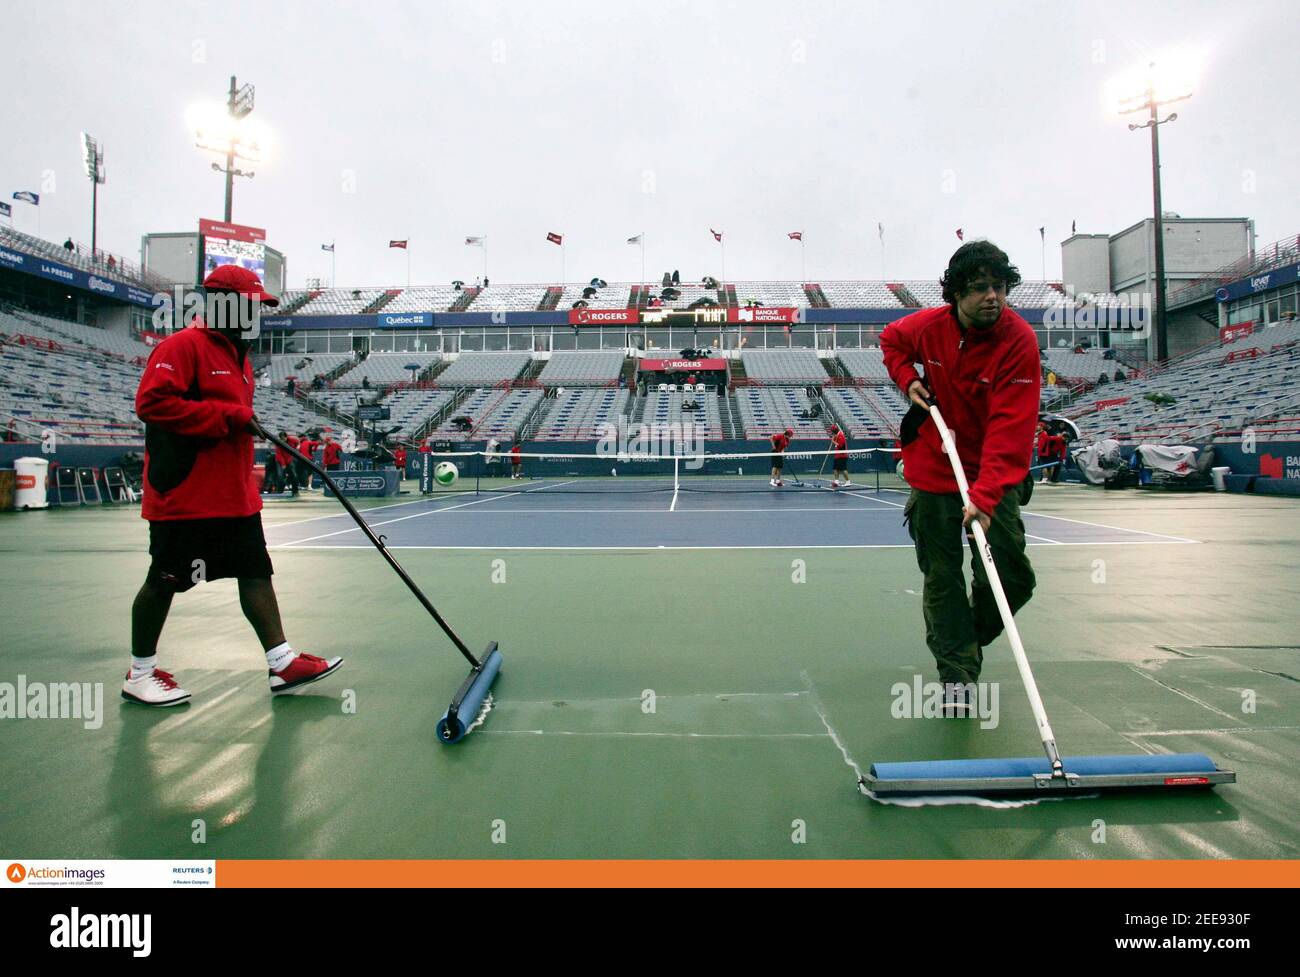 Tennis - Rogers Cup, Sony Ericsson WTA Tour - Montreal, Canada - 20/8/06  Workers dry the court during a rain delay at the Rogers Cup, Sony Ericsson WTA Tour in Montreal, Canada August 20, 2006  Mandatory Credit: Action Images / Chris Wattie  Livepic Stock Photo